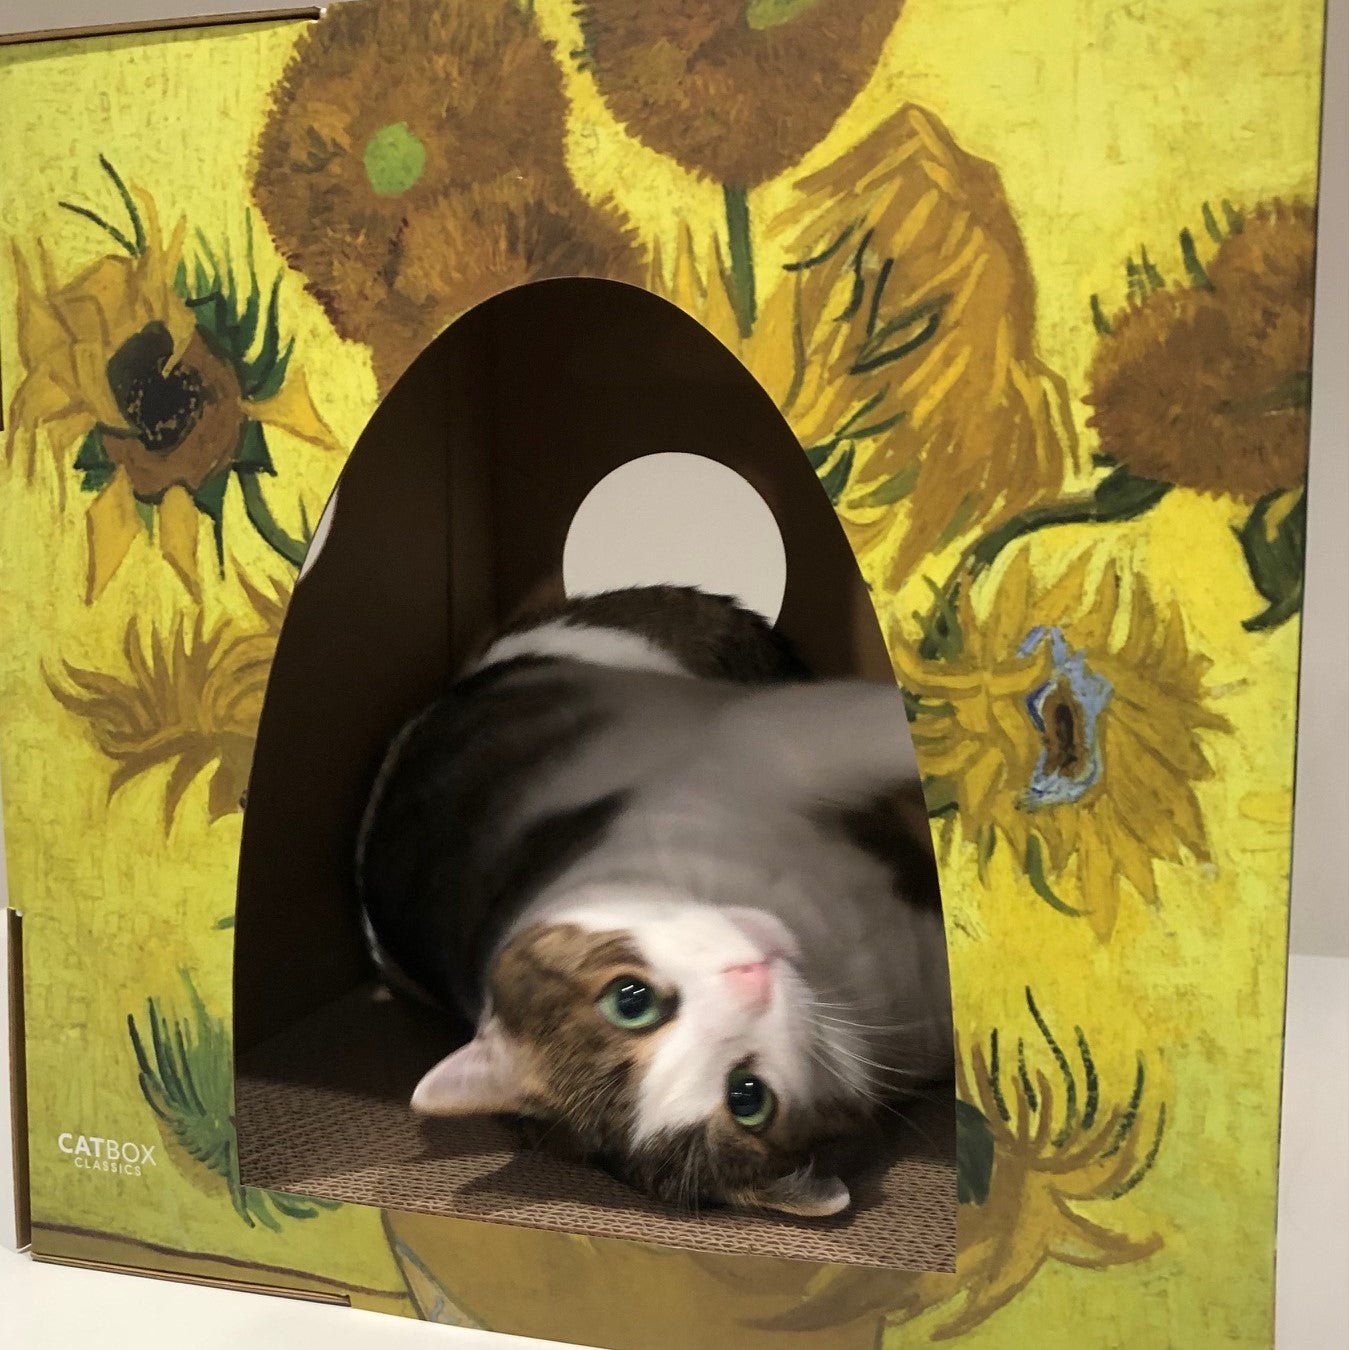 Cute cat laying in the front of the meow masterpieces cardboard cat house